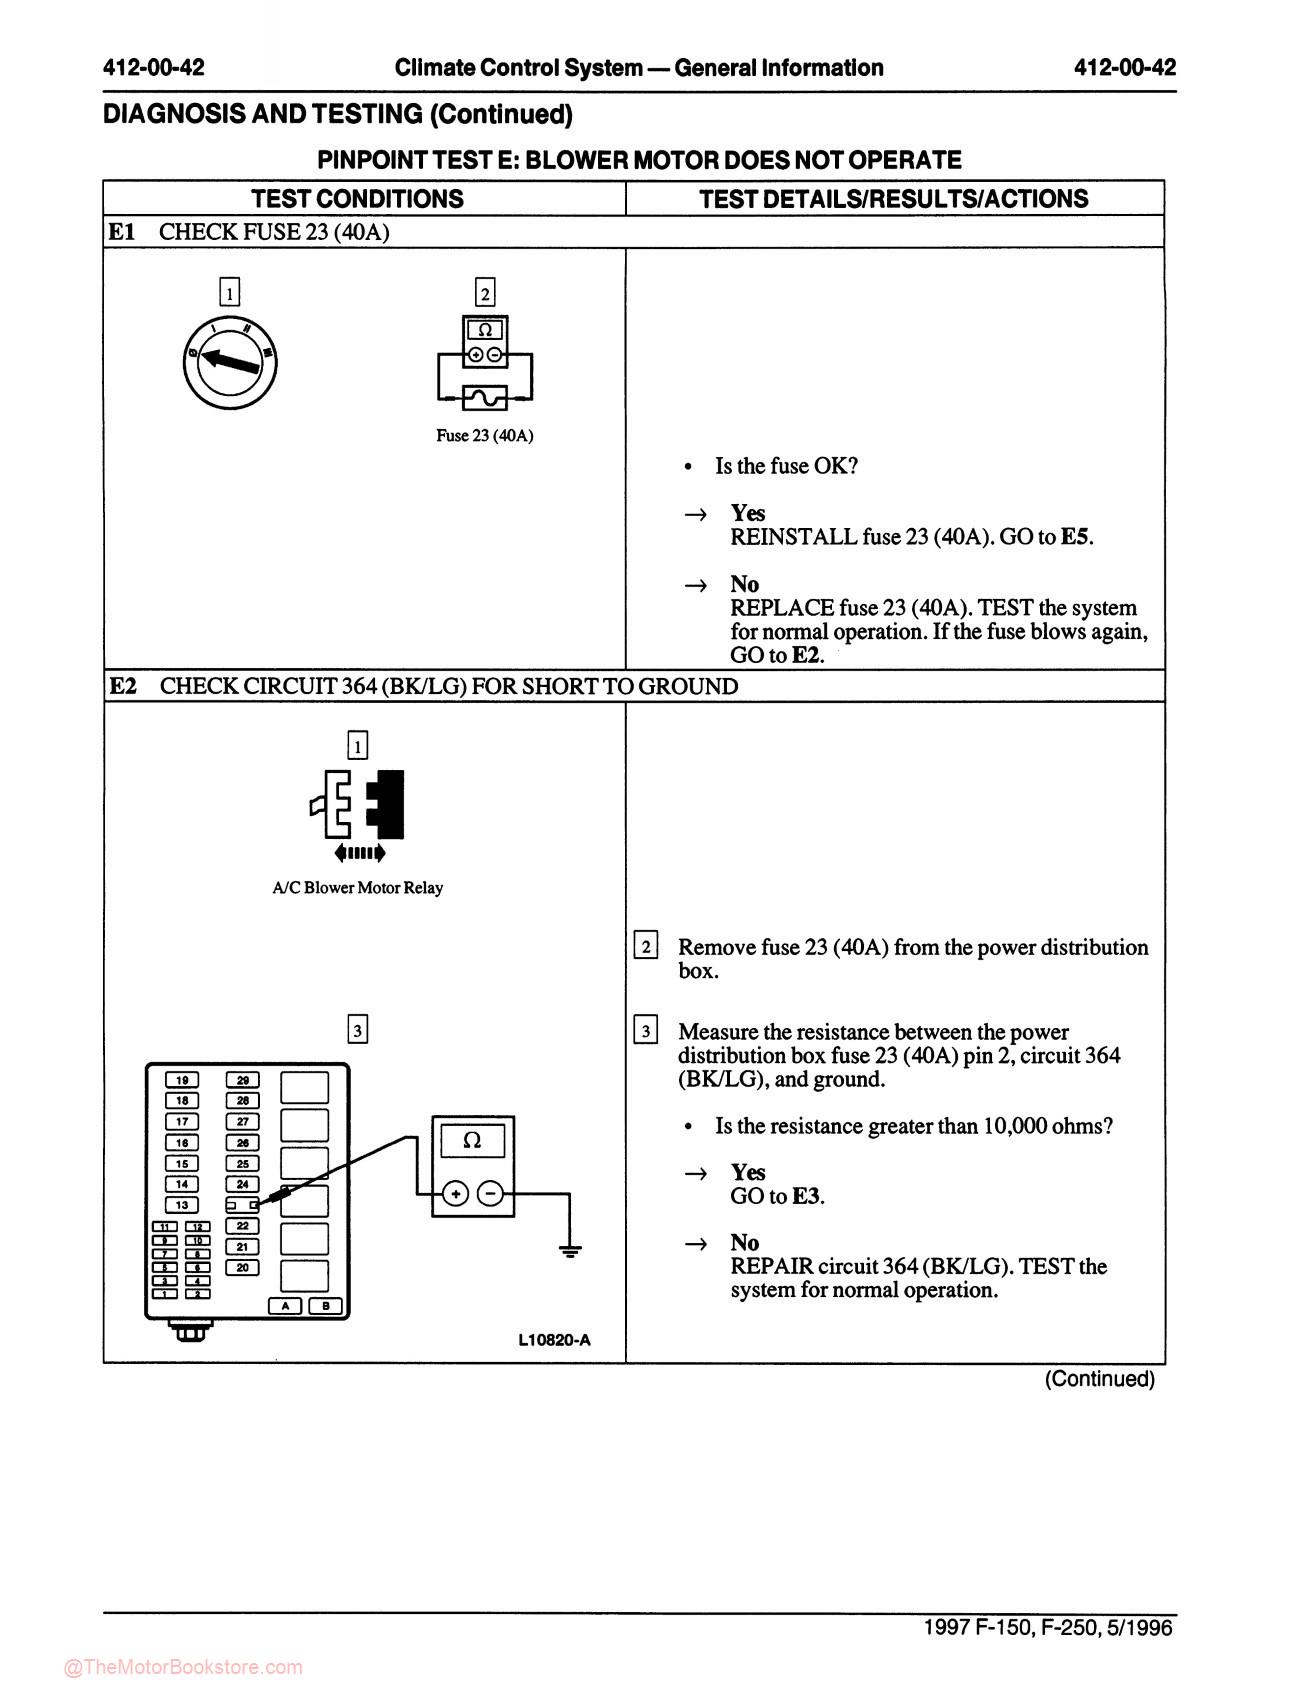 1997 Ford F-150, F-250 Truck Service Manual - Sample Page 4